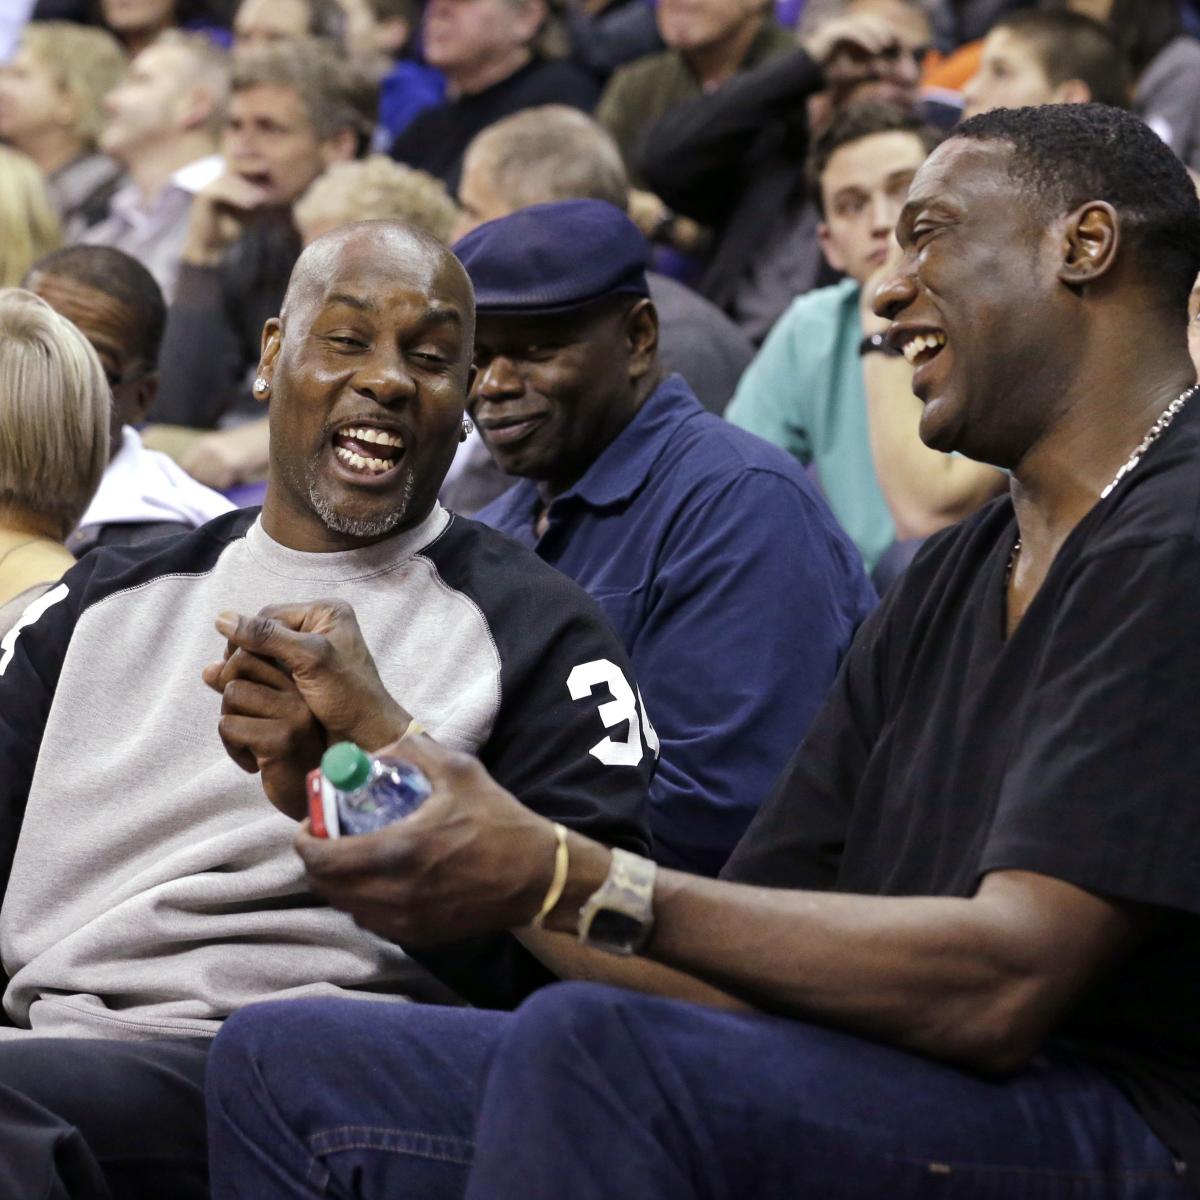 Gary Payton, Shawn Kemp reconnect to watch their sons face off